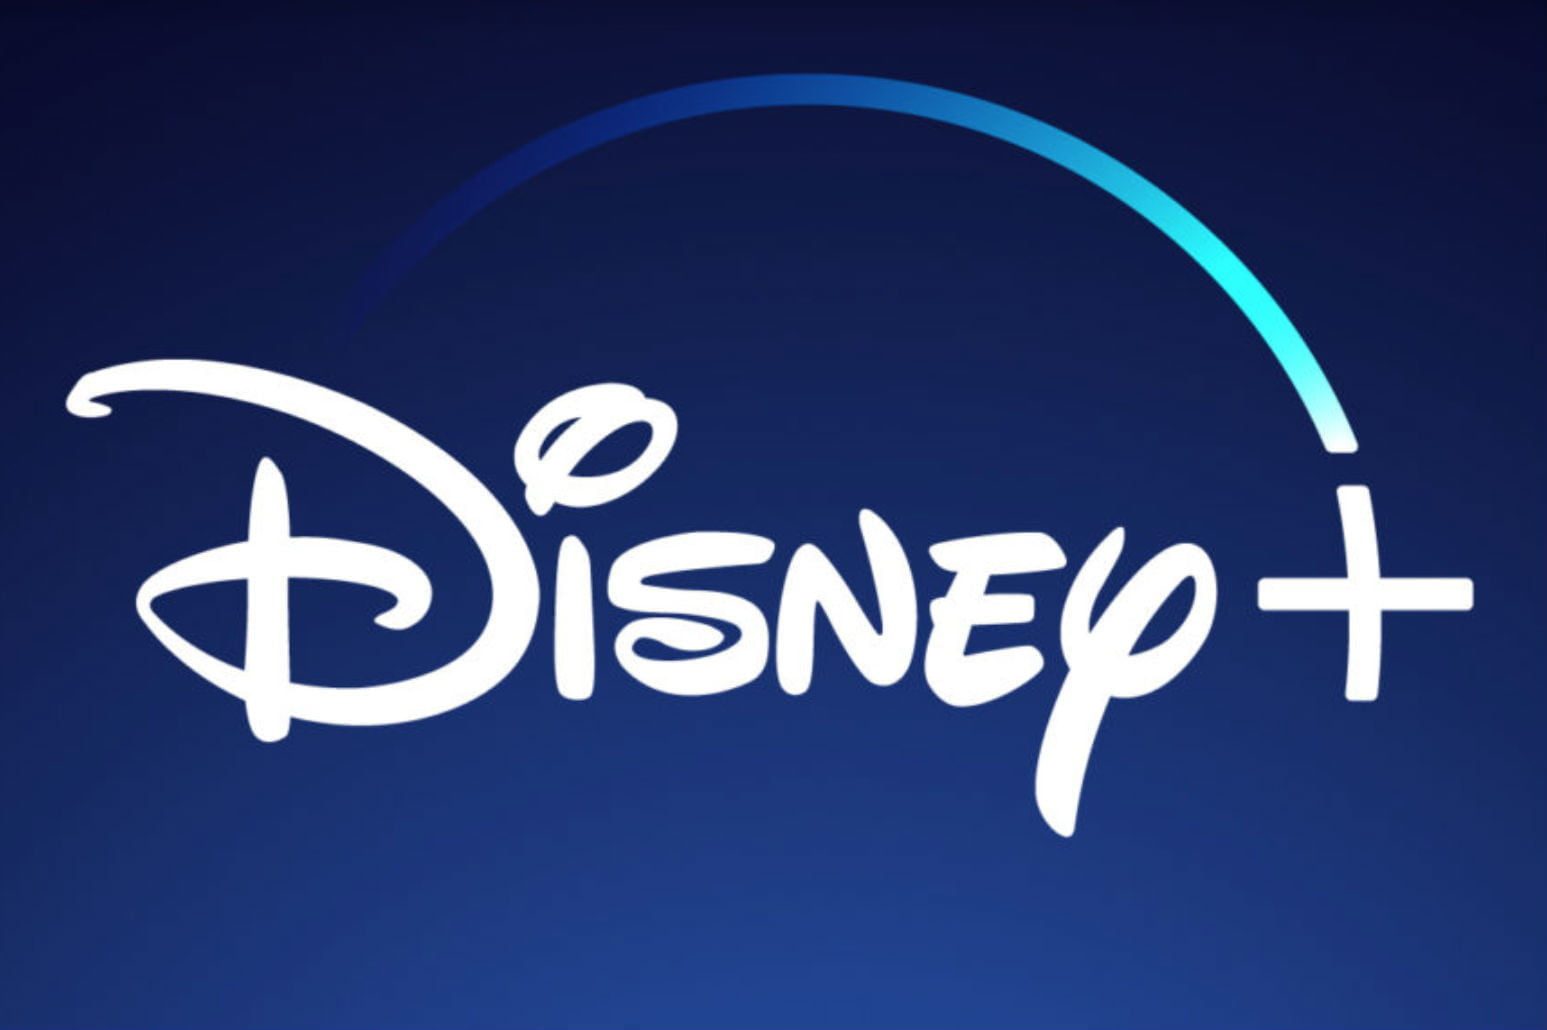 Disney Plus August 2021 Release Schedule: All TV Shows & Movies Coming